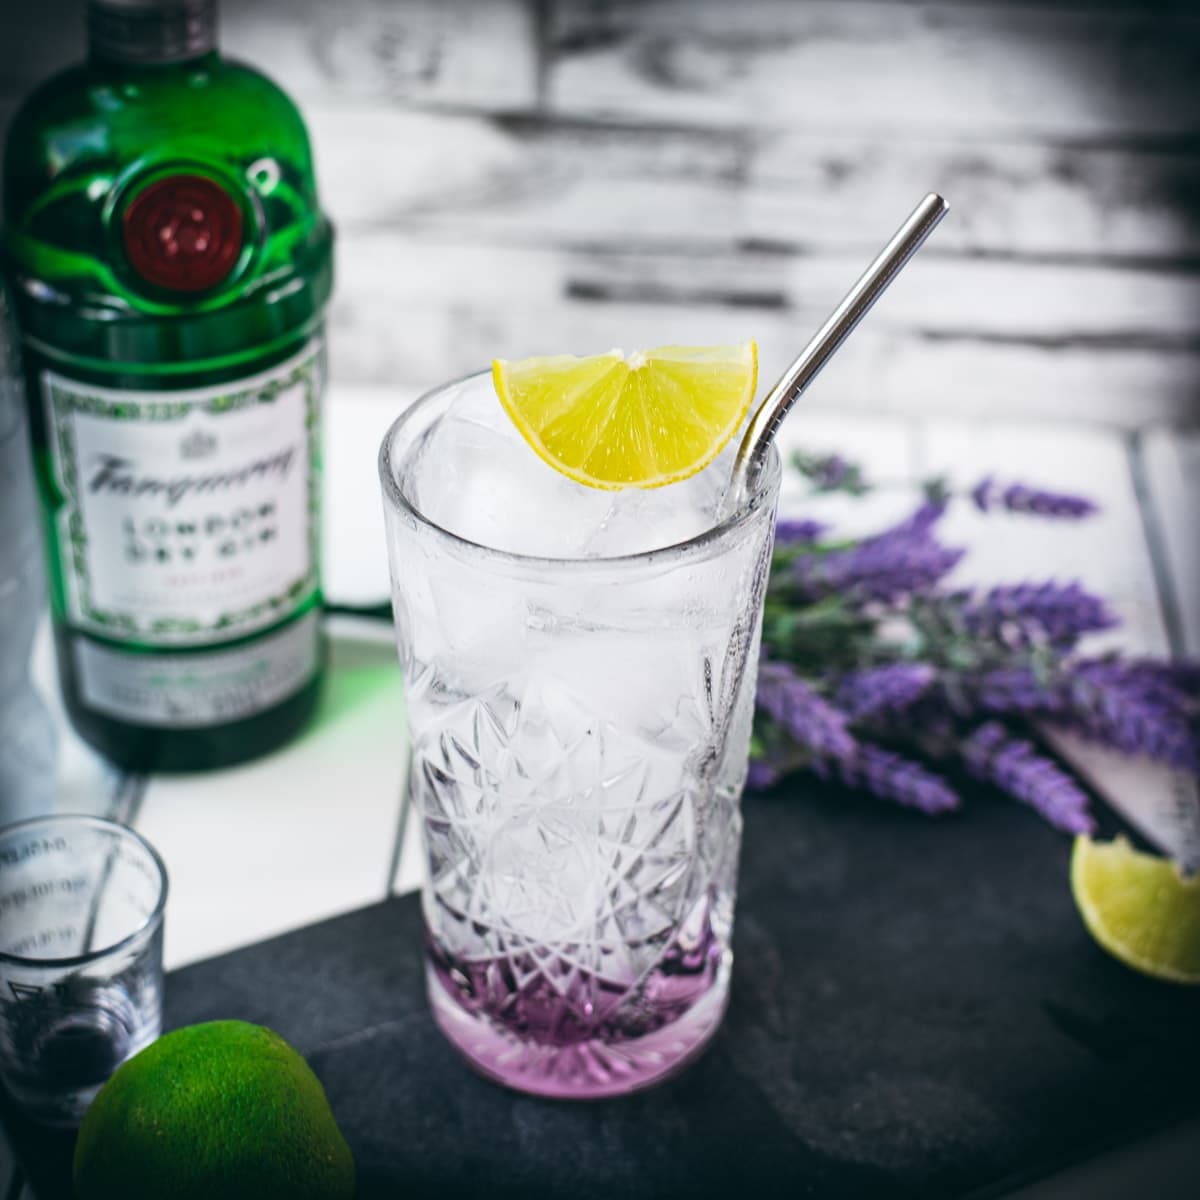 Sipping on Summer - Lavender Gin and Tonic